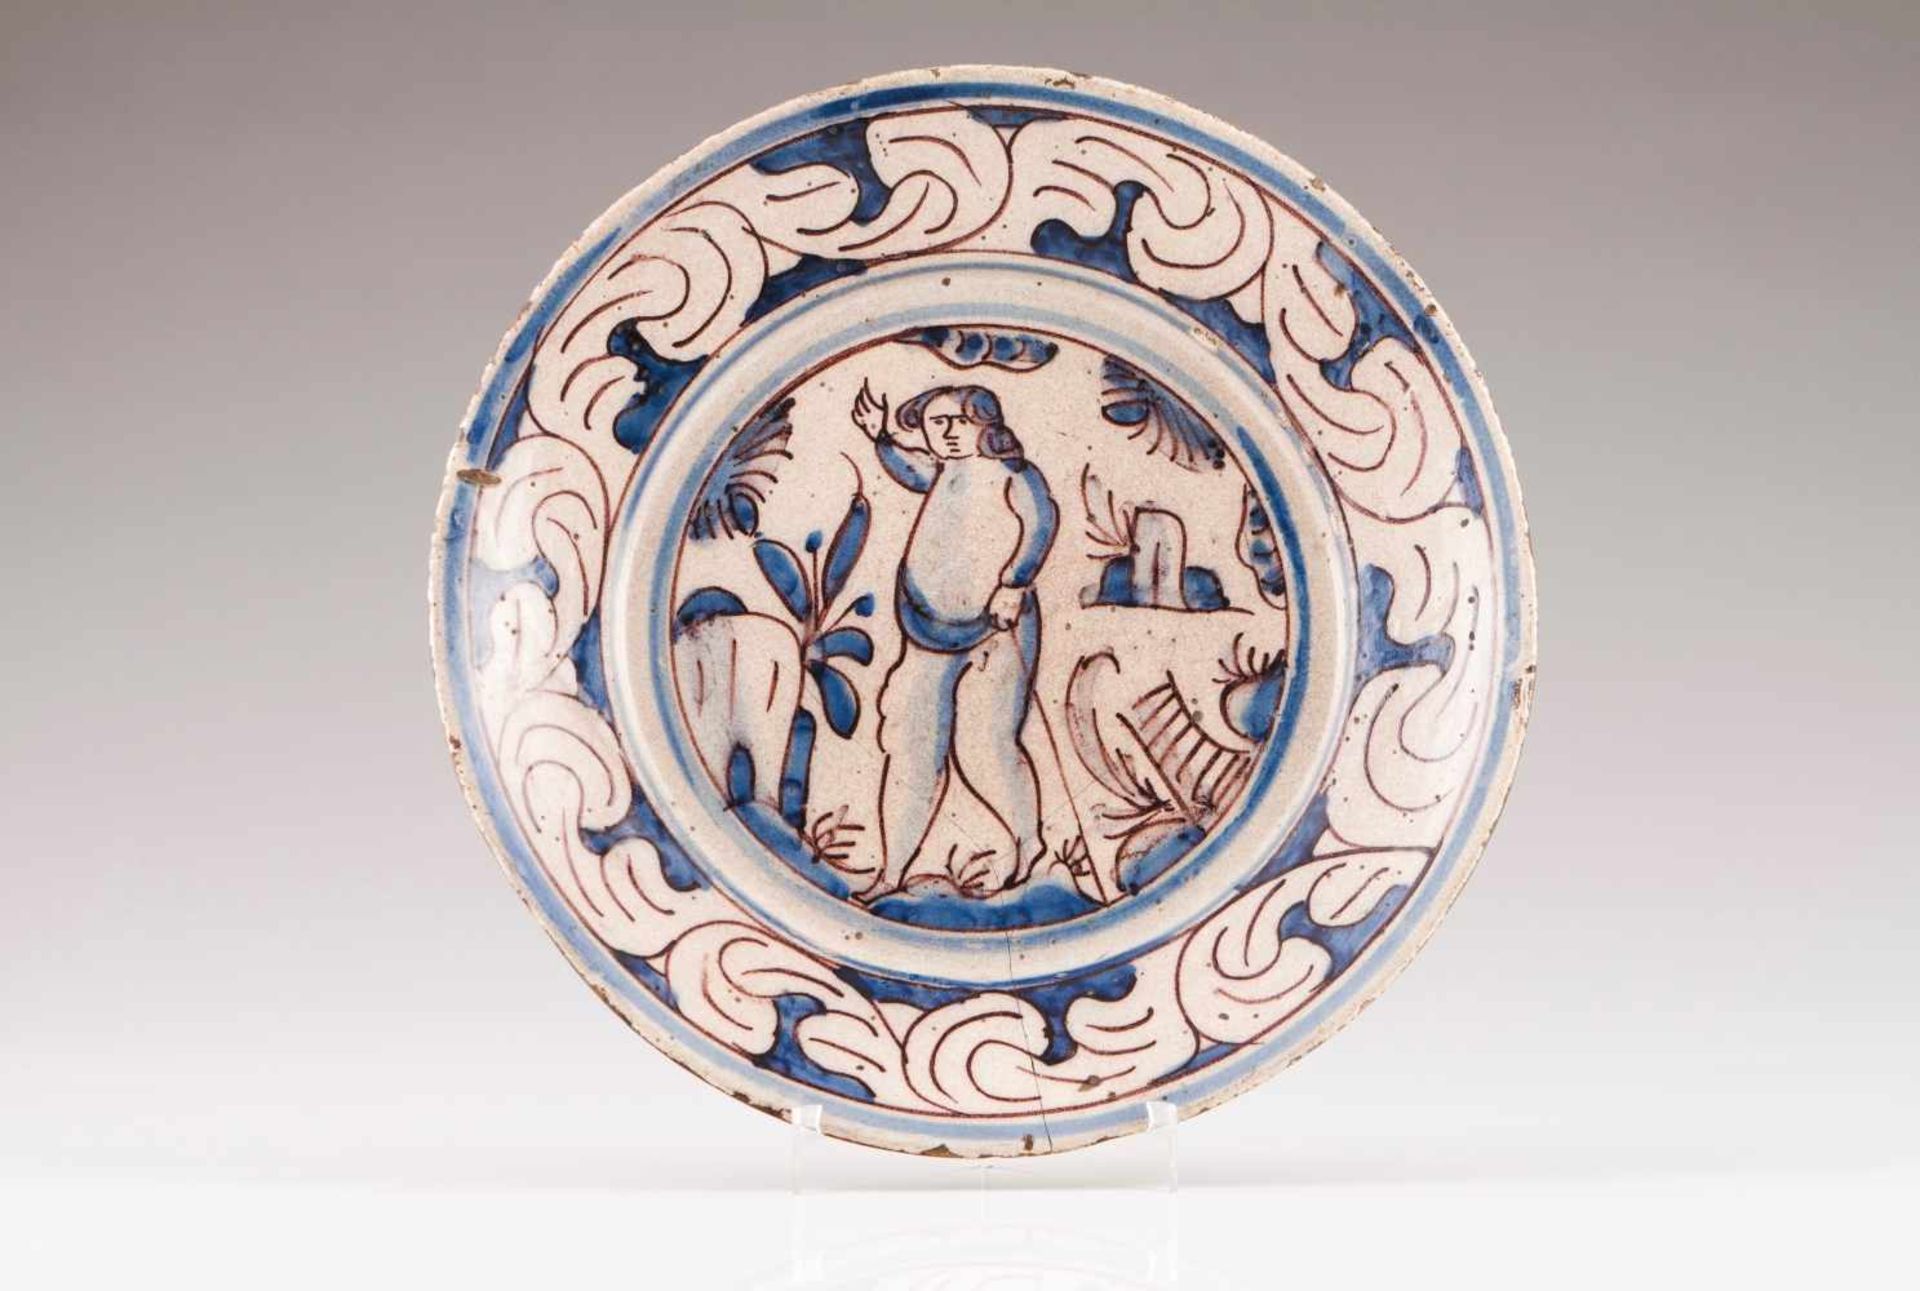 A platePortuguese faienceBlue and vinous decoration depicting landscape with figureTab with